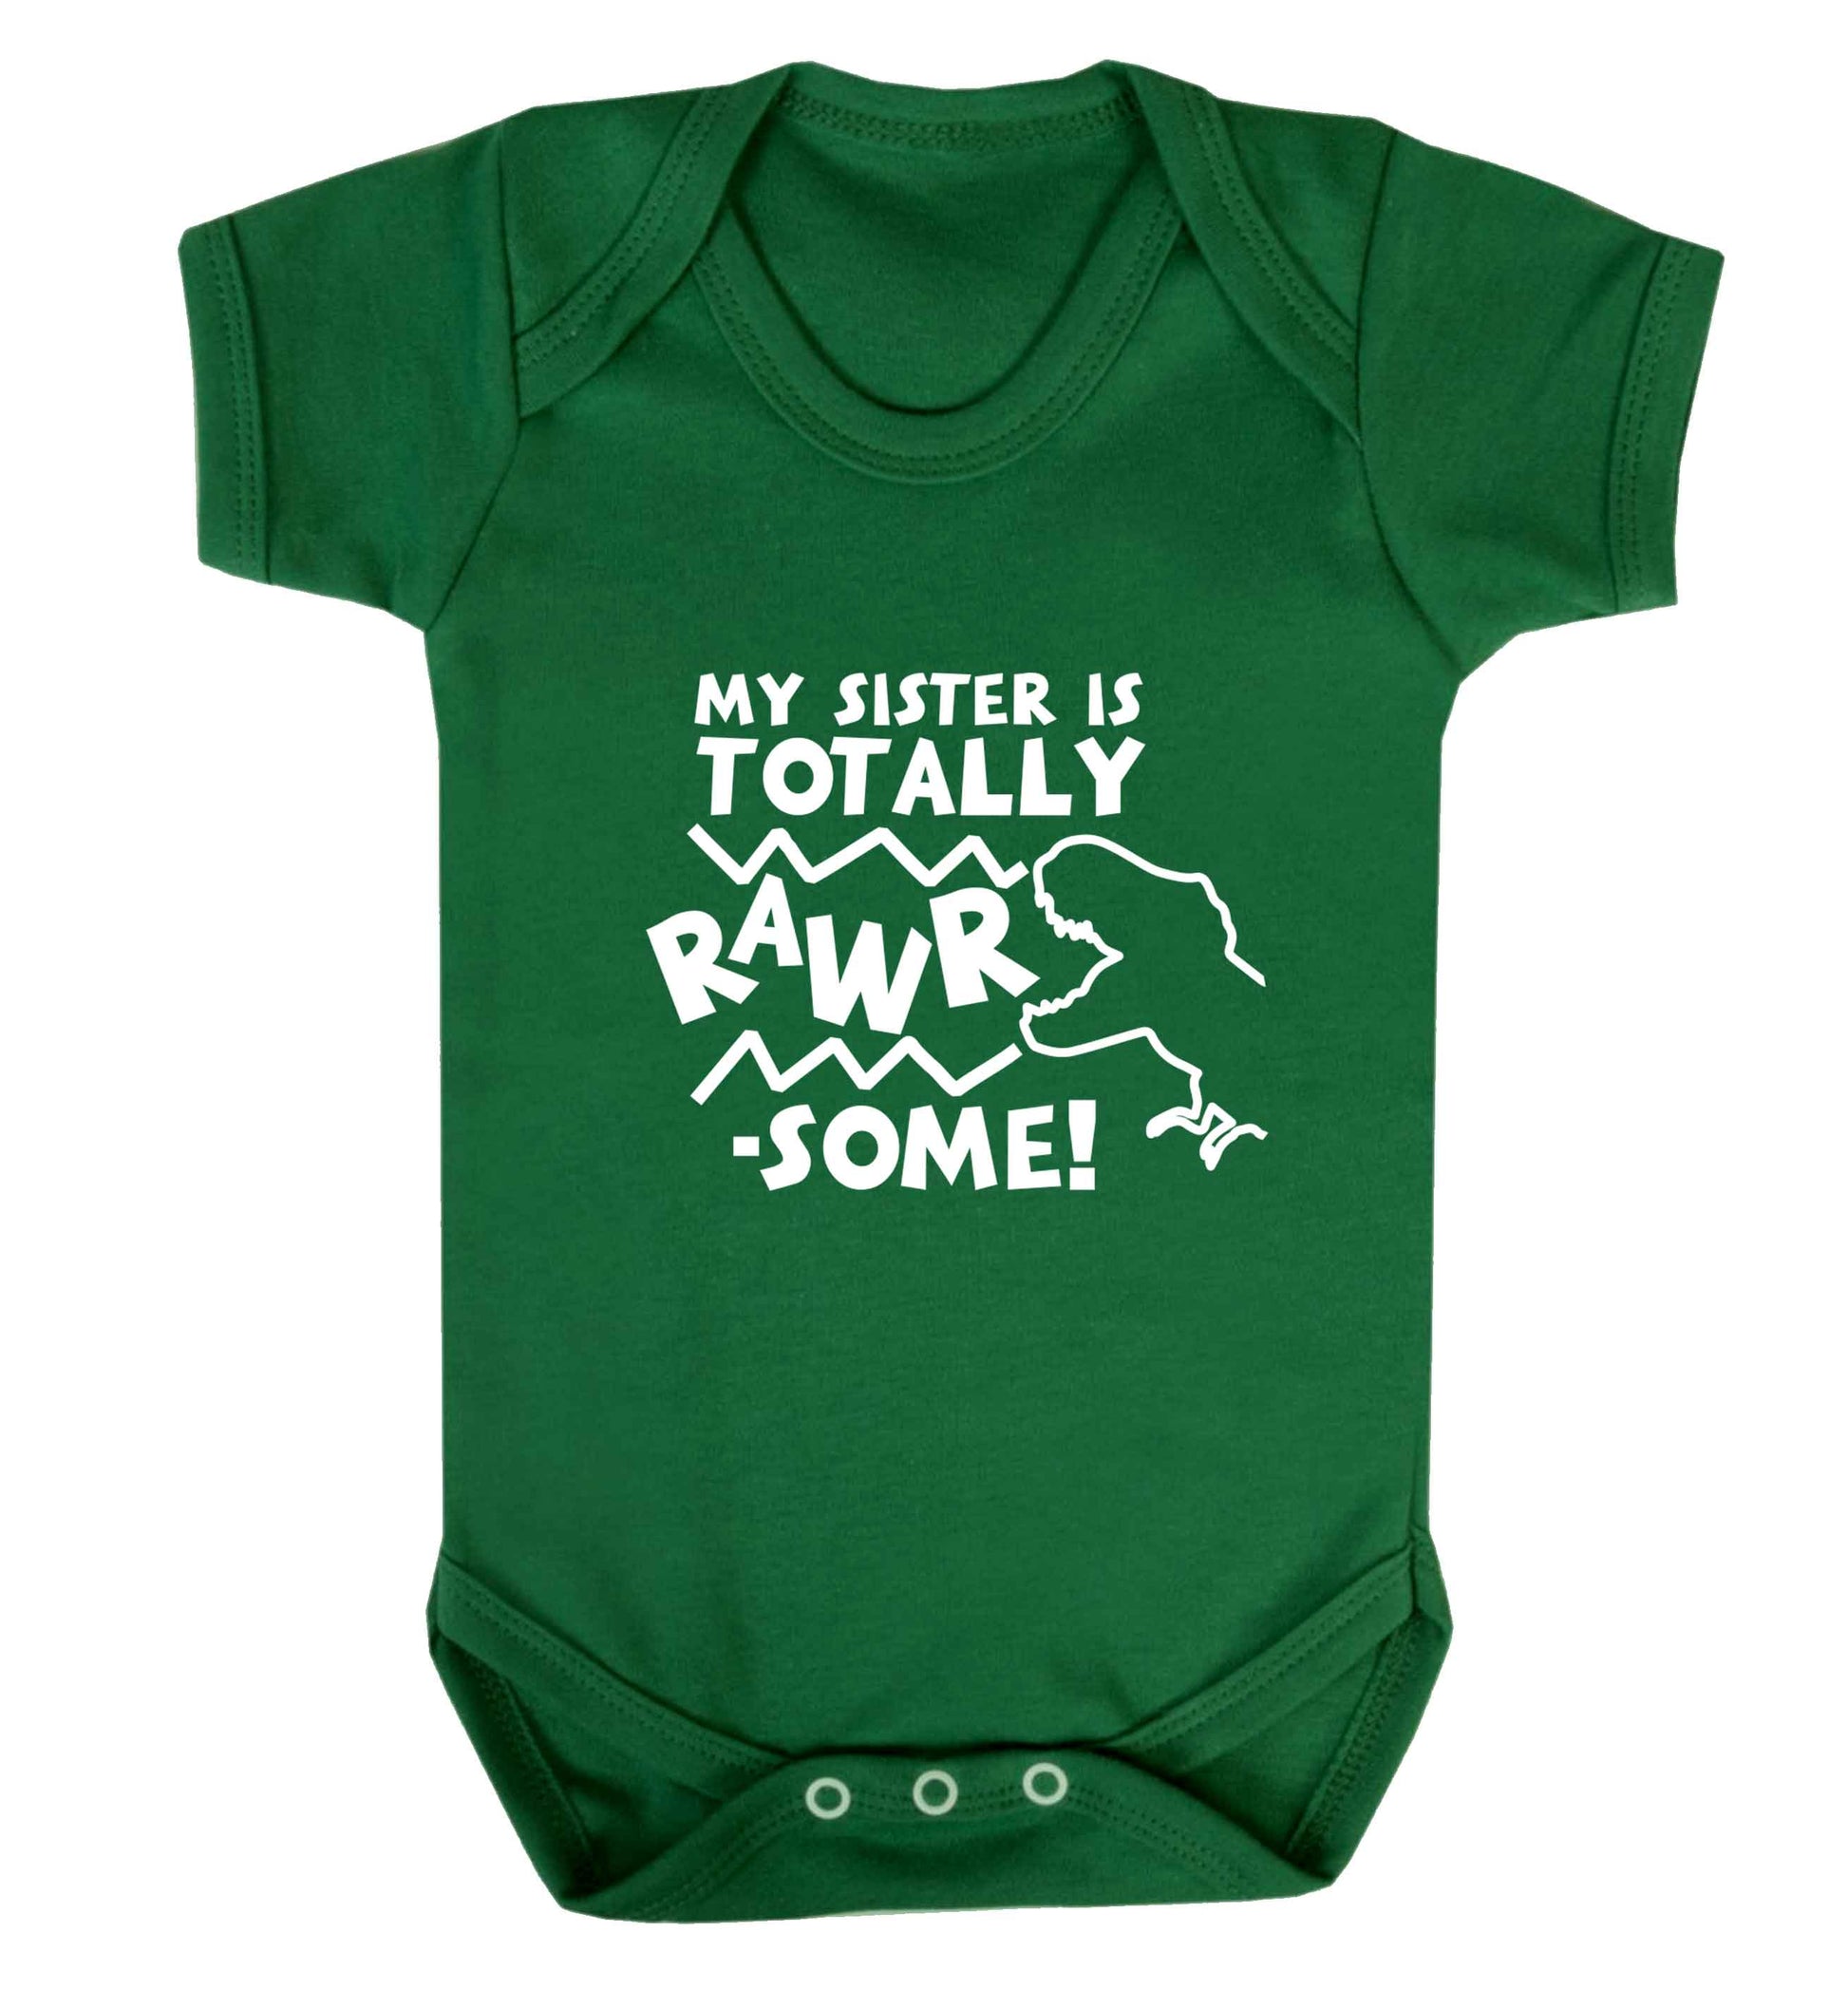 My sister is totally rawrsome baby vest green 18-24 months